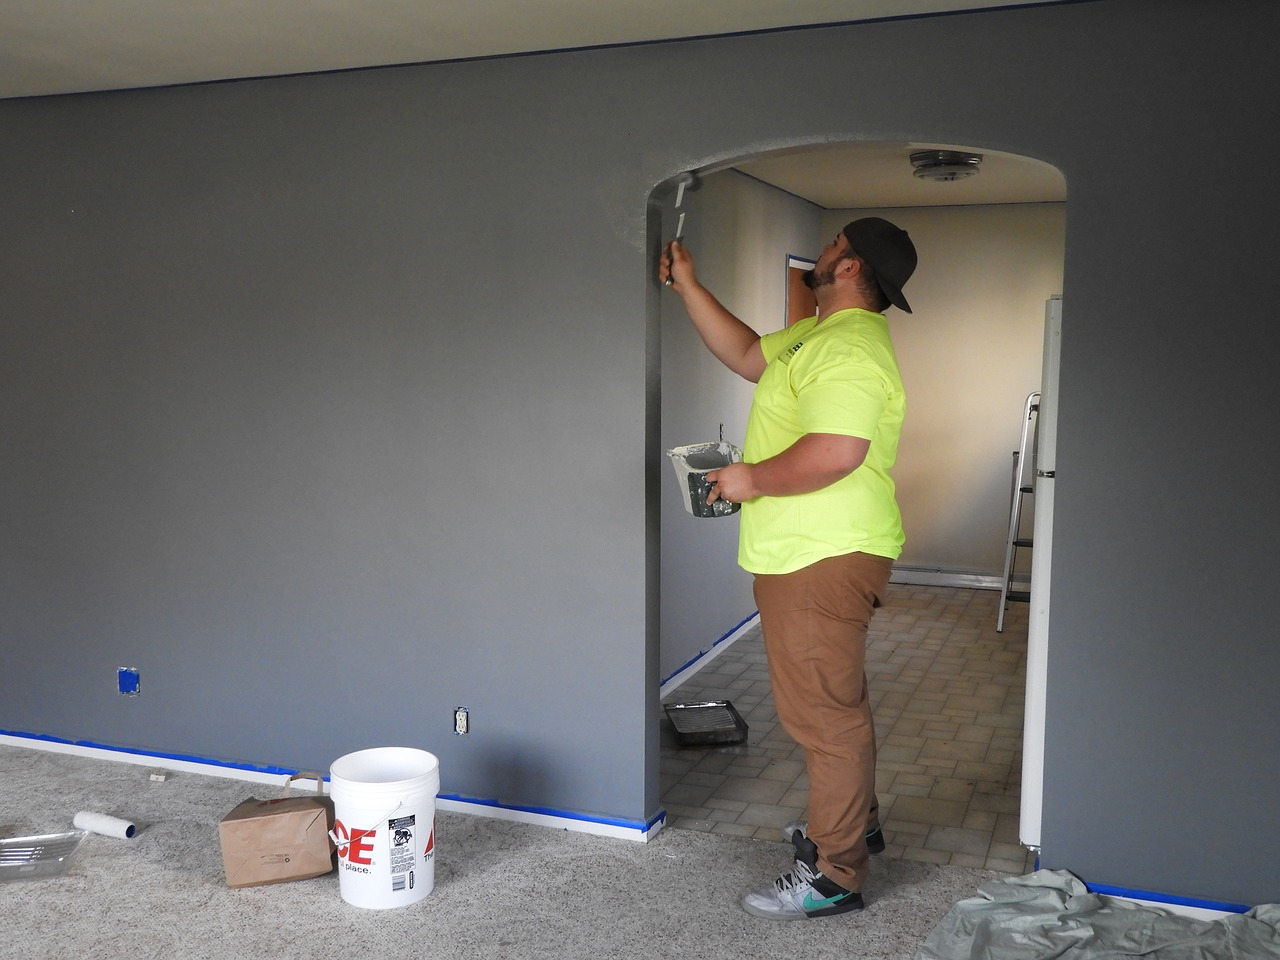 A man improving his home by painting a room with gray walls.